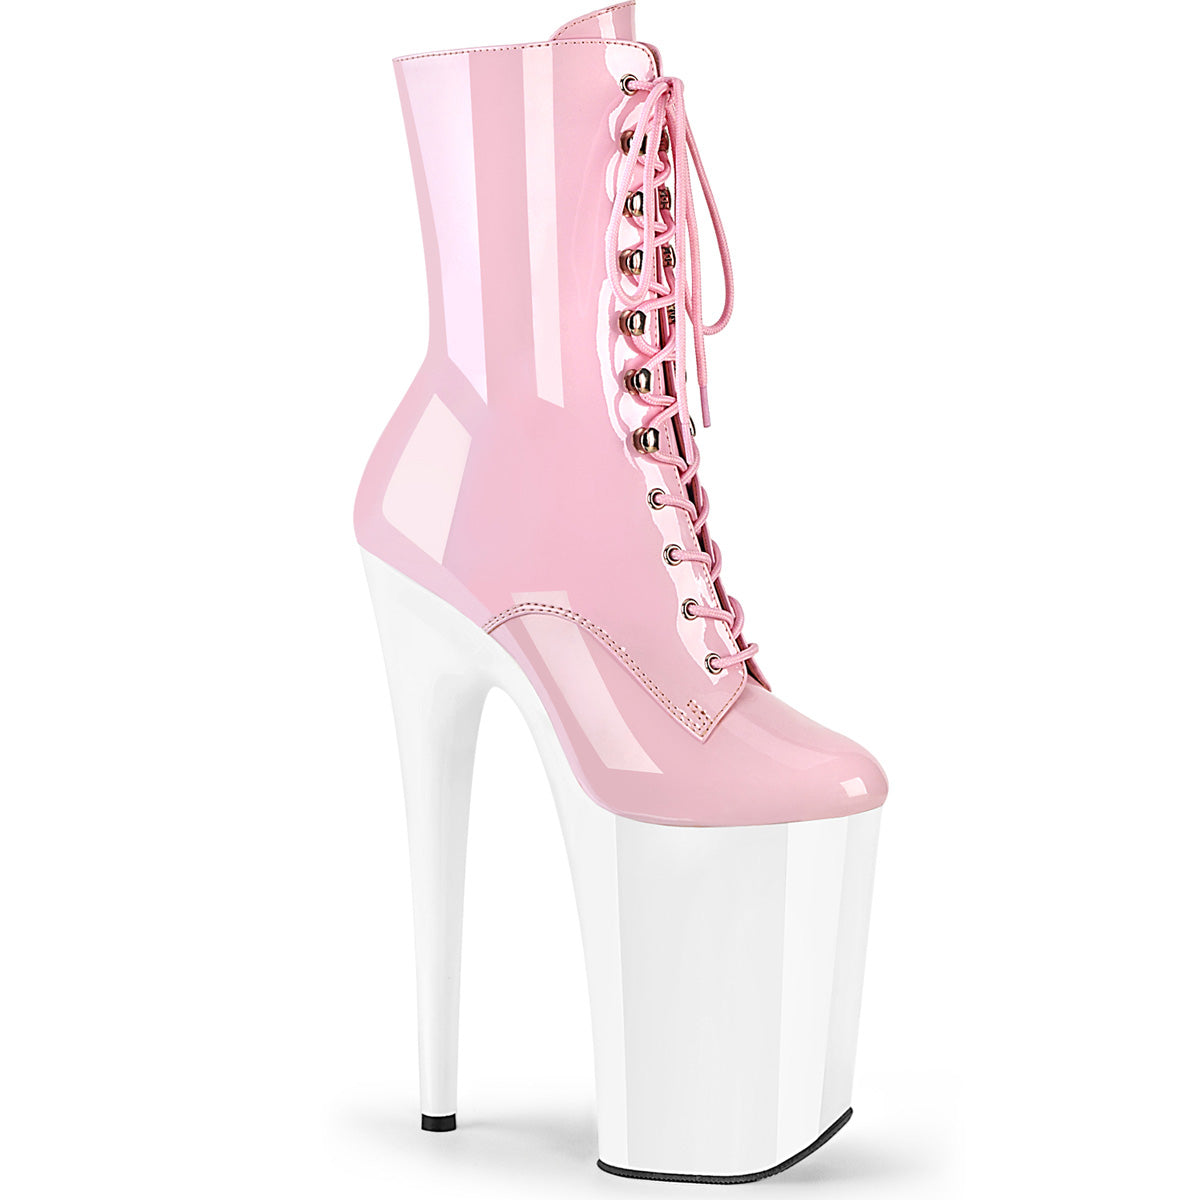 9-inch 'Sky High' Shoes are the World's Highest Heels - High heels daily